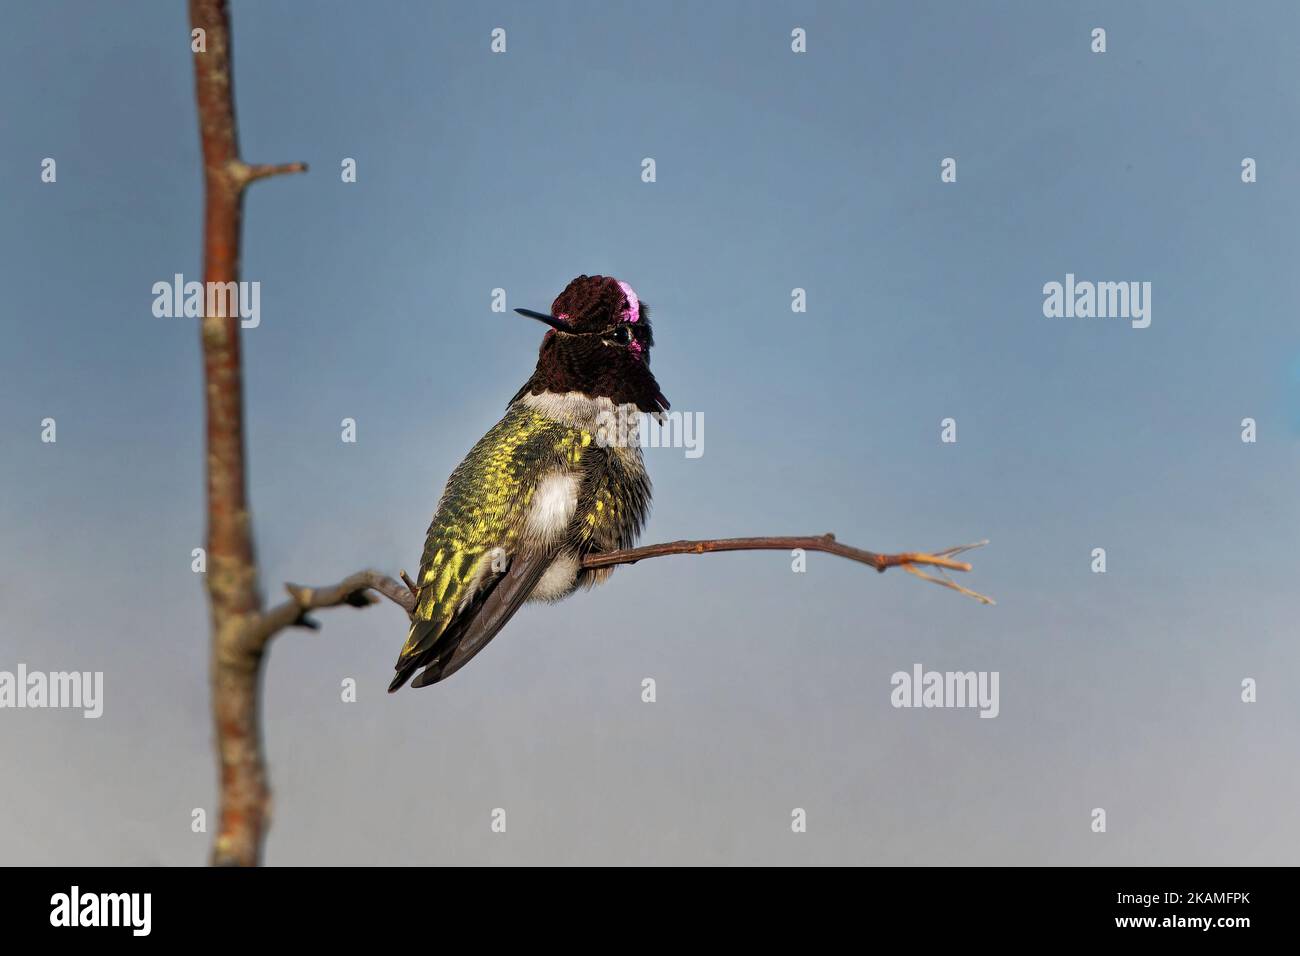 A closeup shot of Anna's hummingbird from the family Trochilidae with blurred background Stock Photo